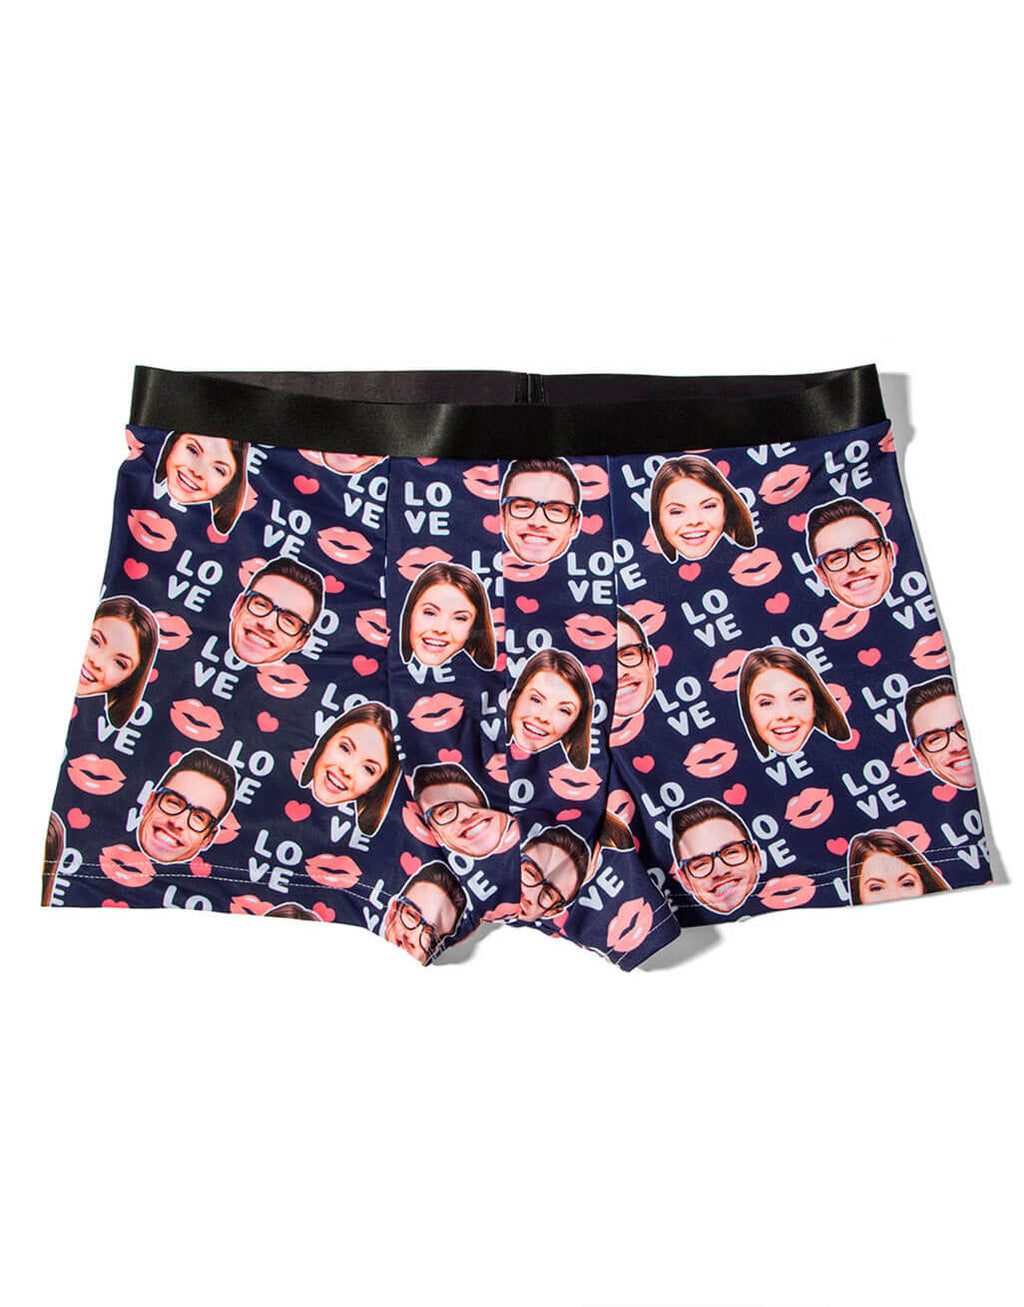 Funny Boxers, Valentines Boxers, Pucker Up, Naughty Valentines